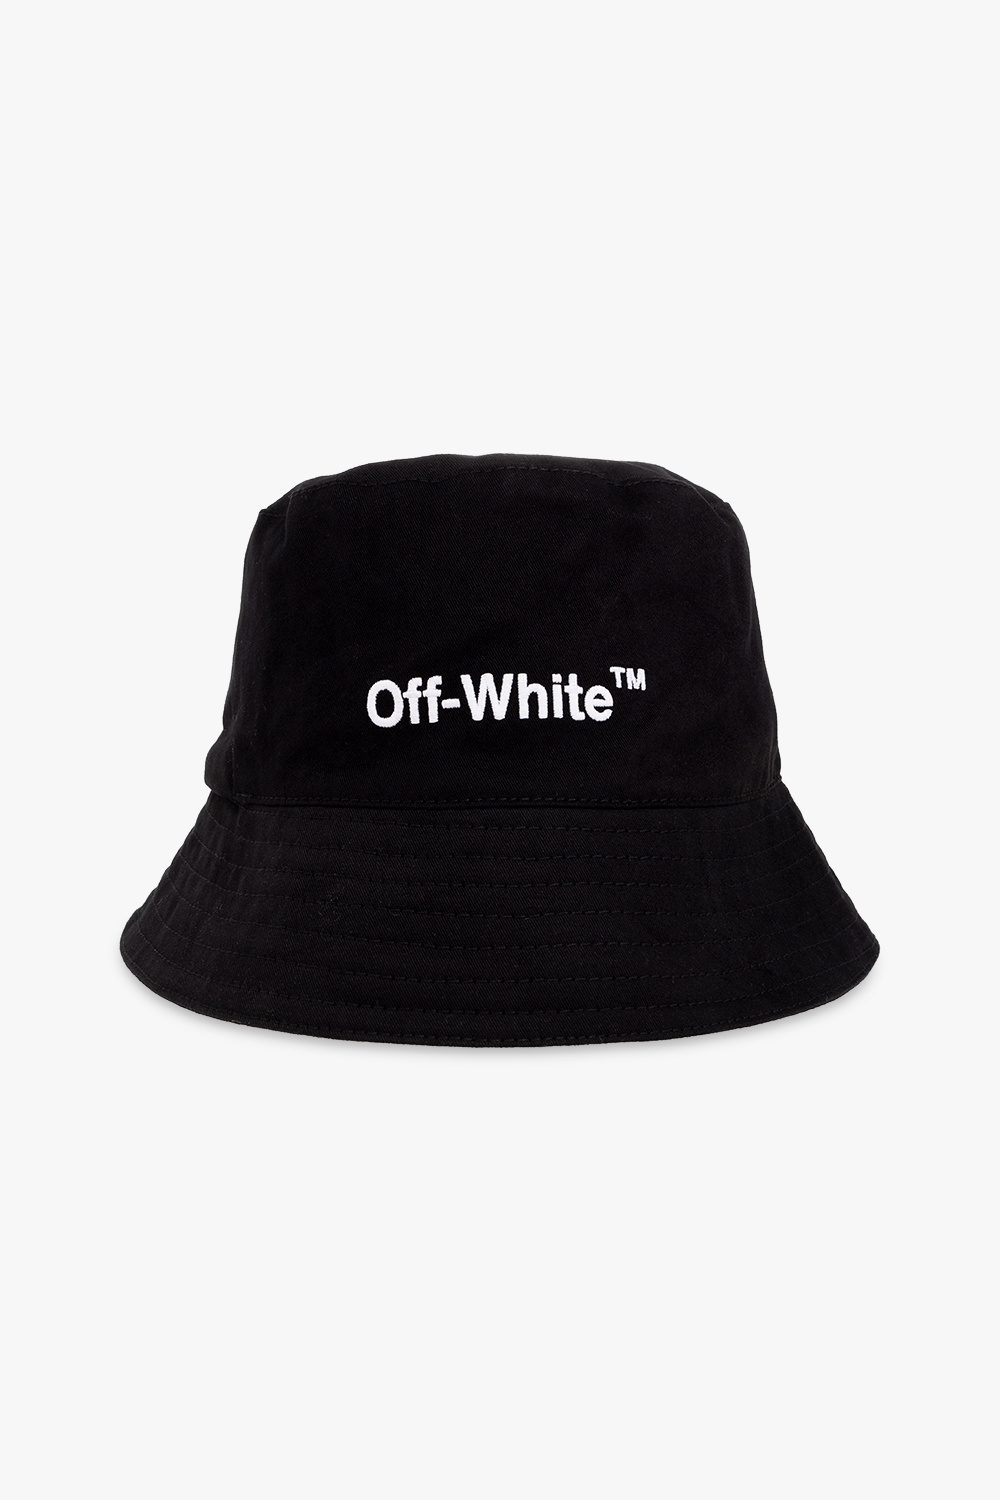 Off-White Bucket Ball hat with logo